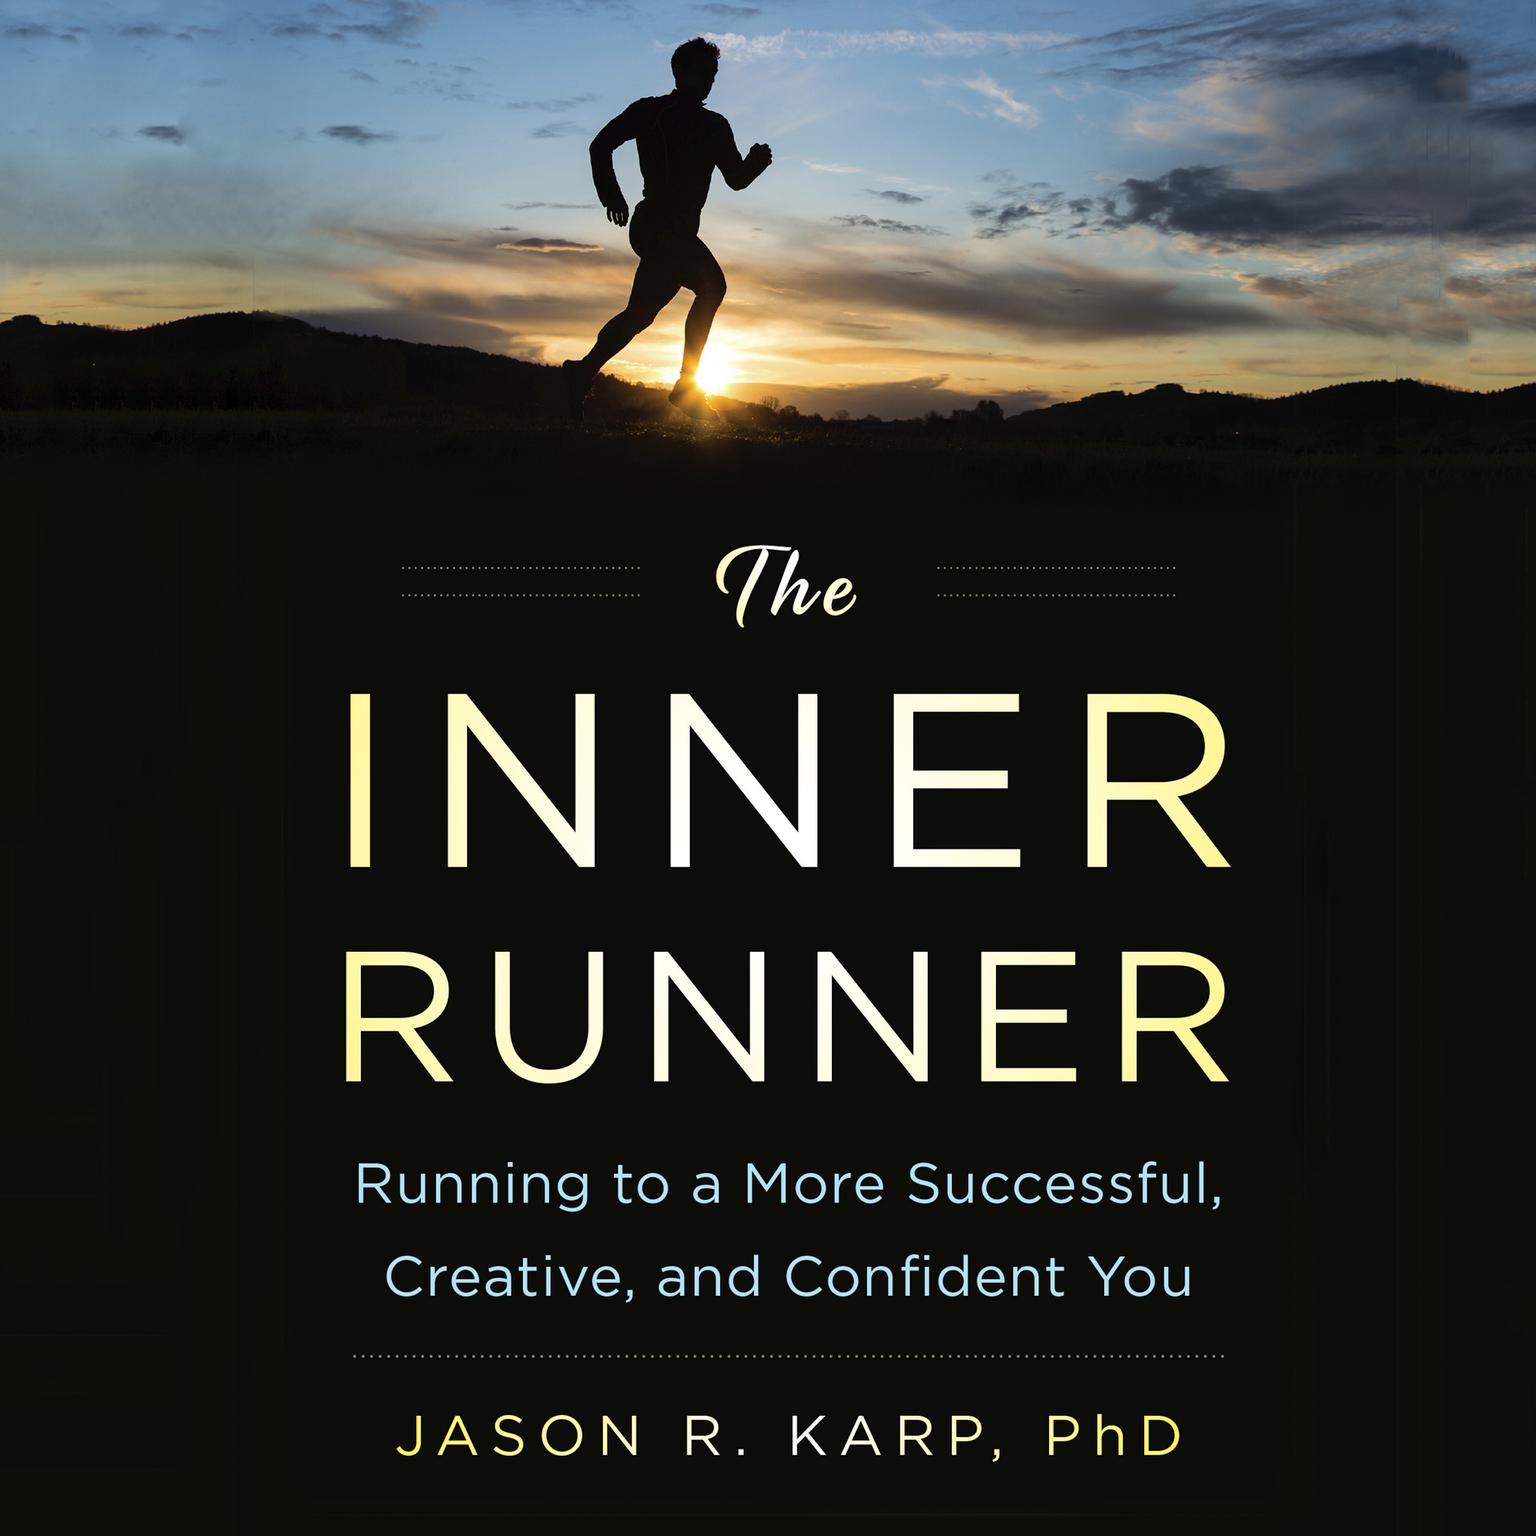 The Inner Runner: Running to a More Successful, Creative, and Confident You Audiobook, by Jason R. Karp